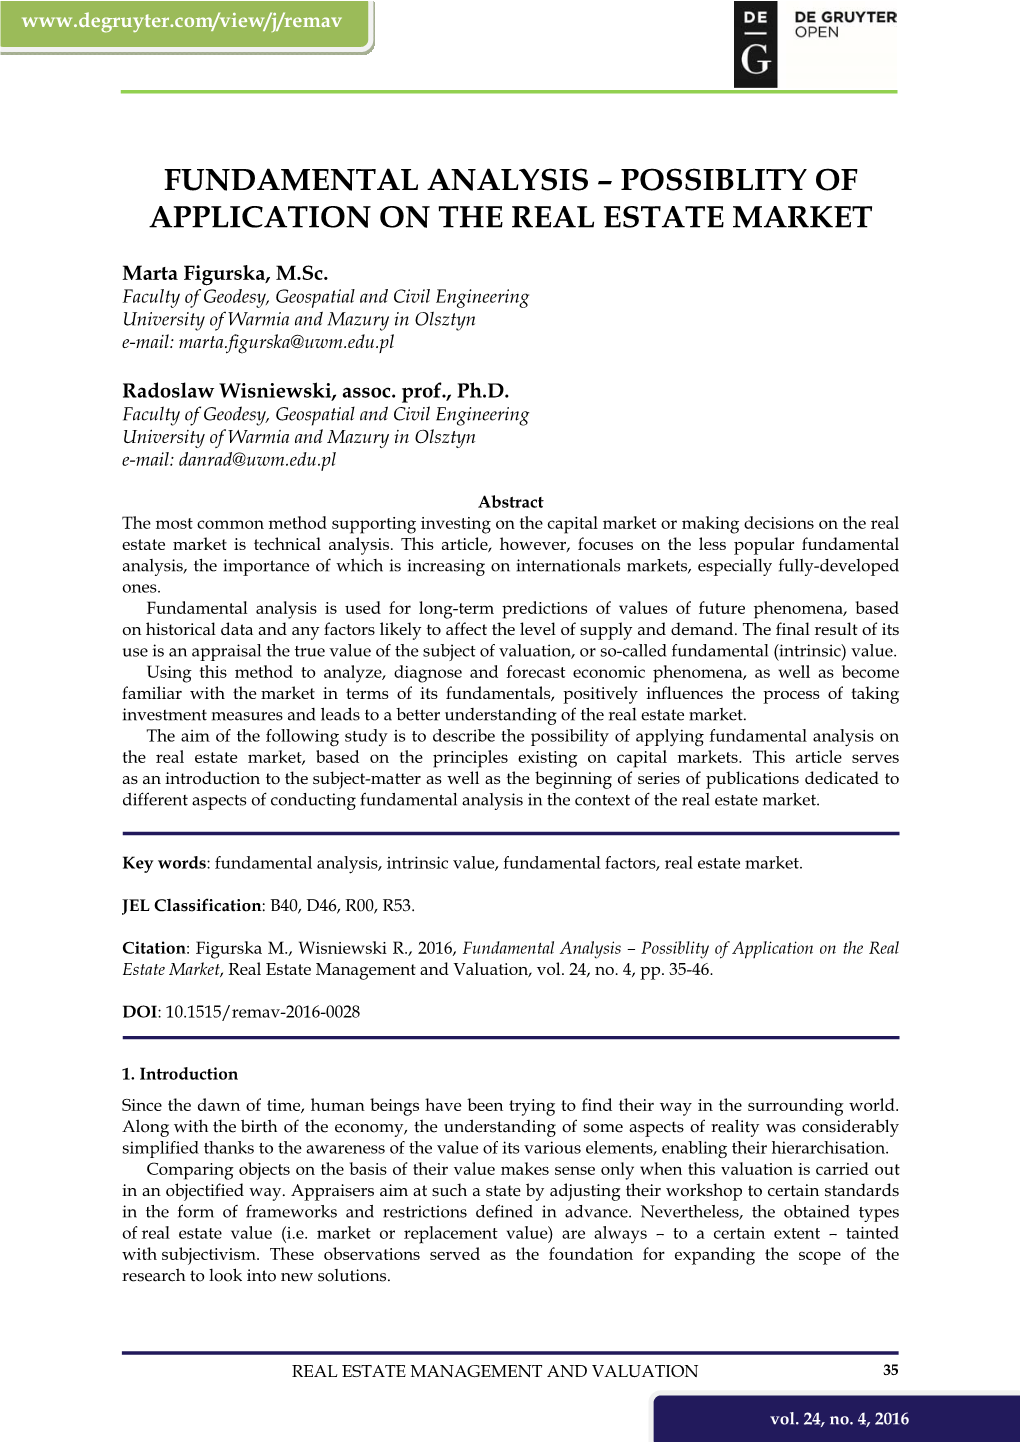 Fundamental Analysis – Possiblity of Application on the Real Estate Market